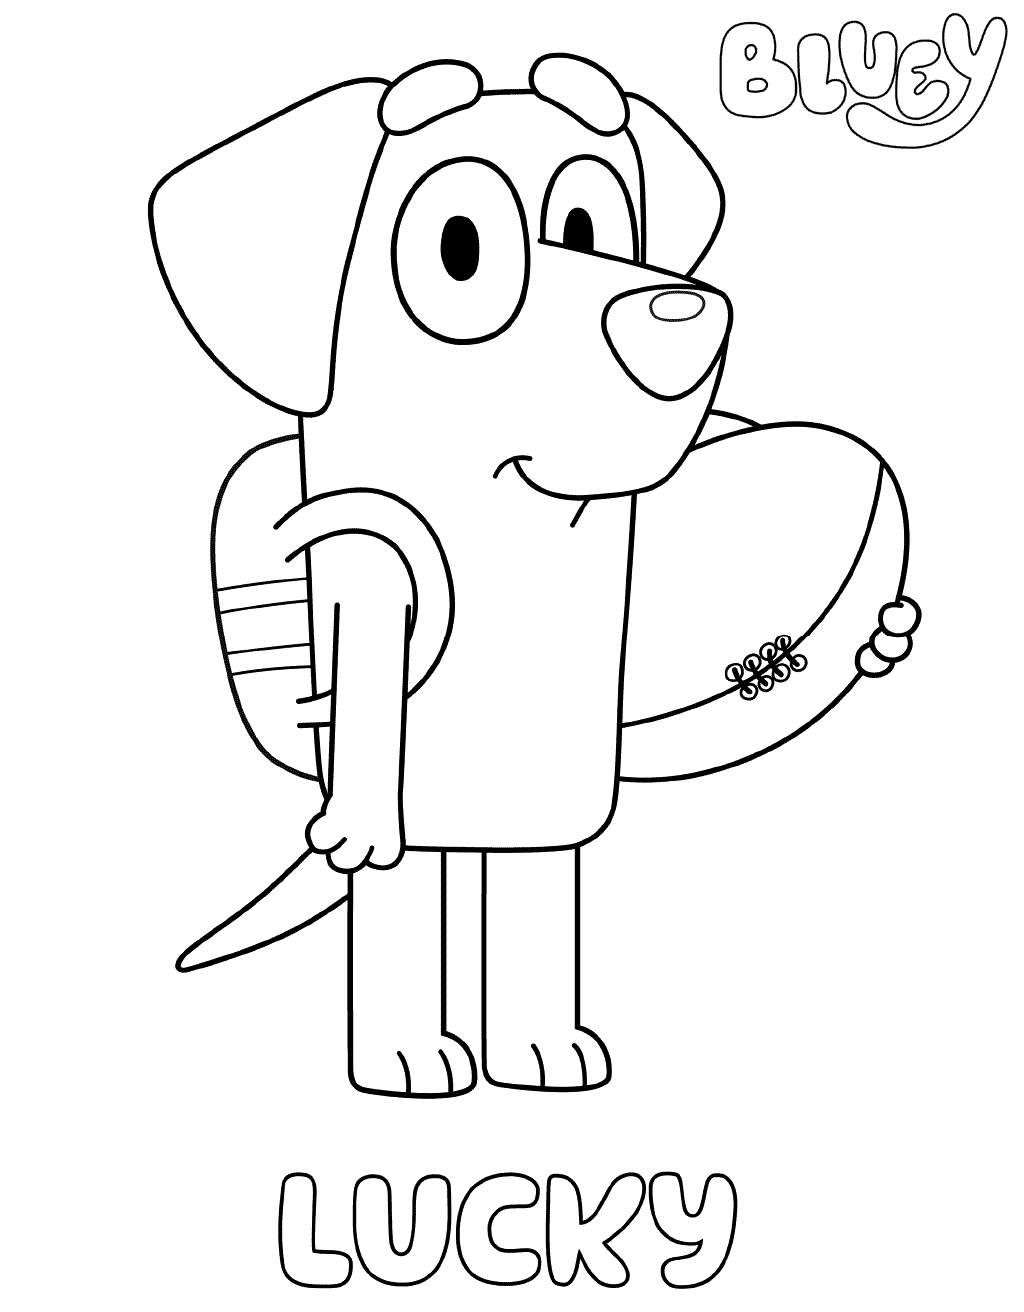 Lucky Blueys Coloring Pages - Coloring Cool